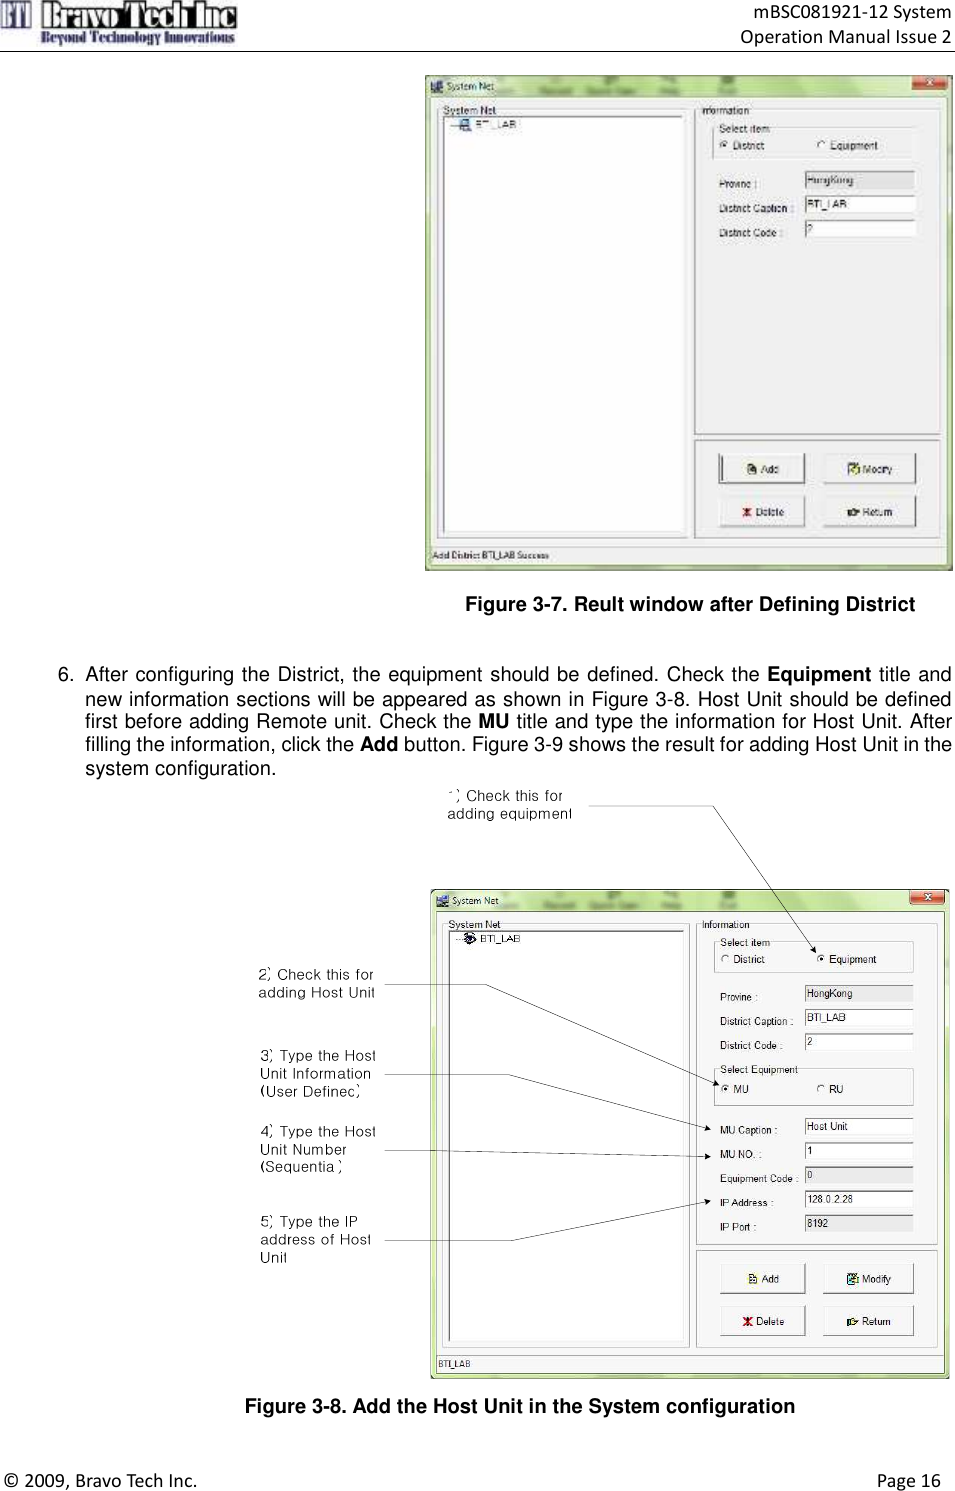                                    mBSC081921-12 System Operation Manual Issue 2  © 2009, Bravo Tech Inc.                                                                                                                                      Page 16    Figure 3-7. Reult window after Defining District   6.  After configuring the District, the equipment should be defined. Check the Equipment title and new information sections will be appeared as shown in Figure 3-8. Host Unit should be defined first before adding Remote unit. Check the MU title and type the information for Host Unit. After filling the information, click the Add button. Figure 3-9 shows the result for adding Host Unit in the system configuration.  Figure 3-8. Add the Host Unit in the System configuration  